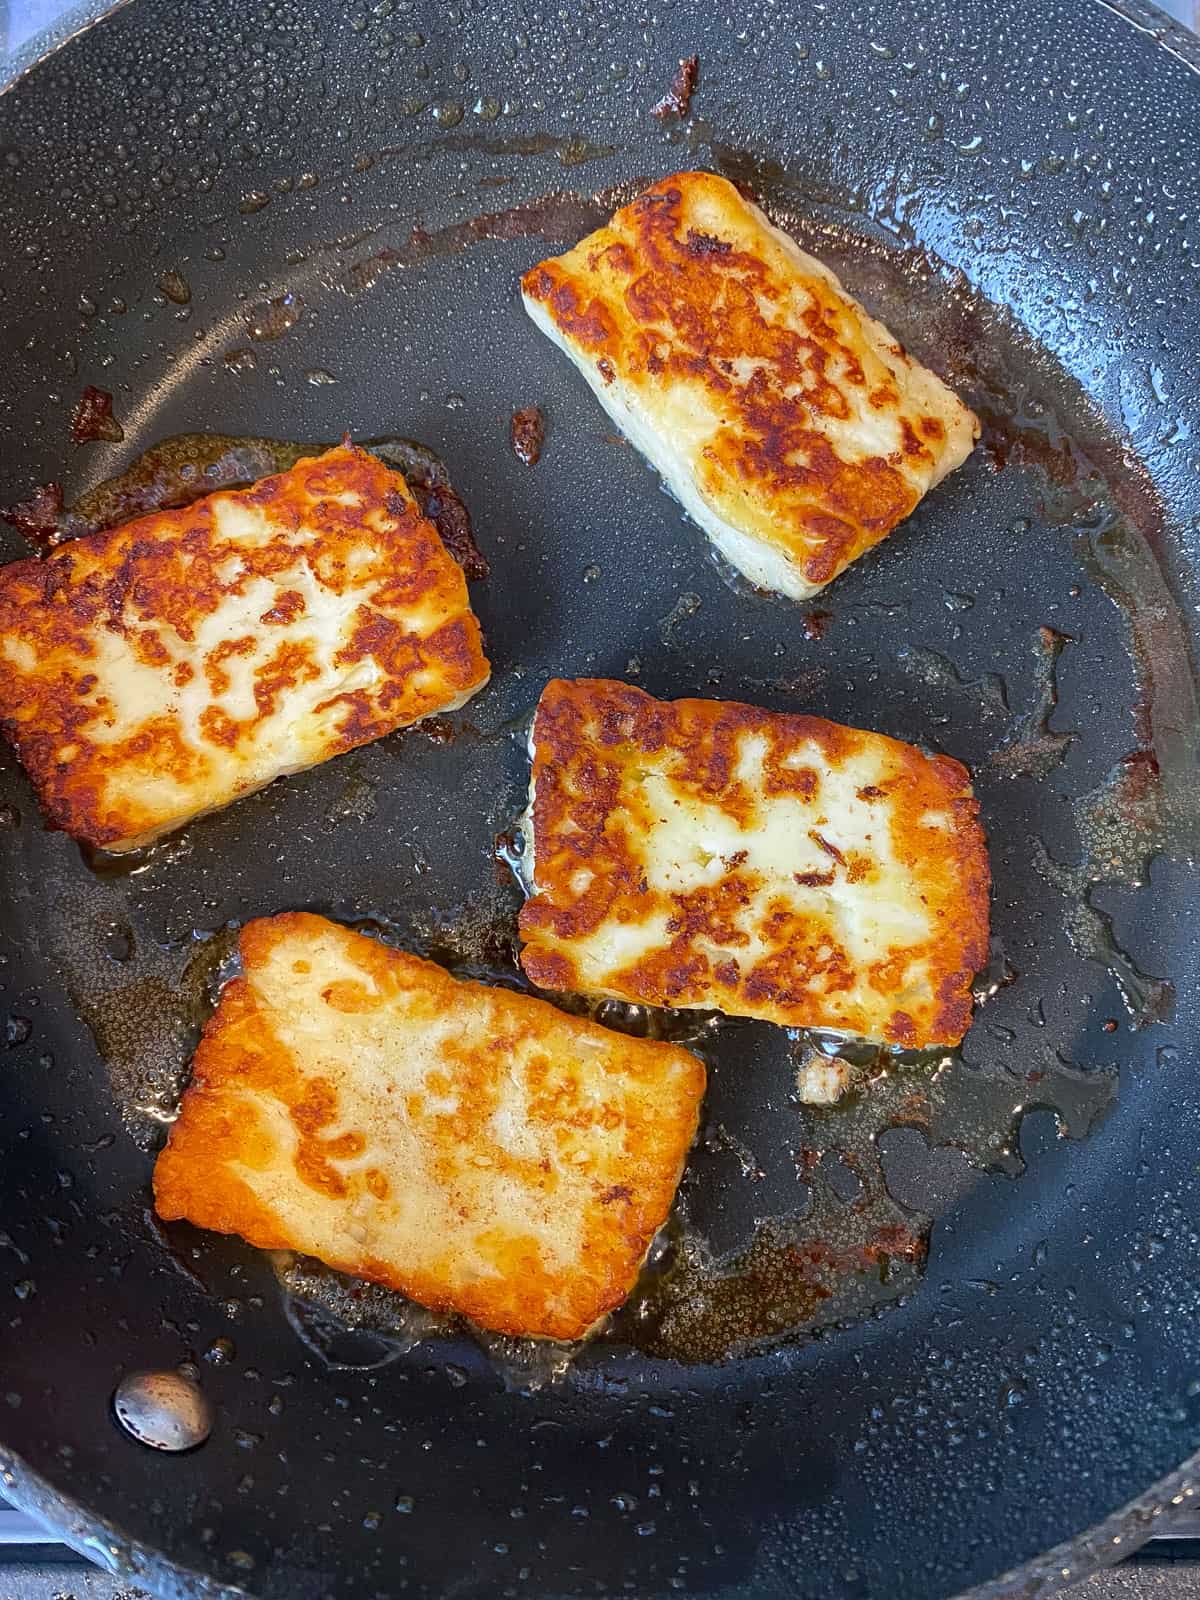 Fry slices of halloumi cheese until golden on both sides.